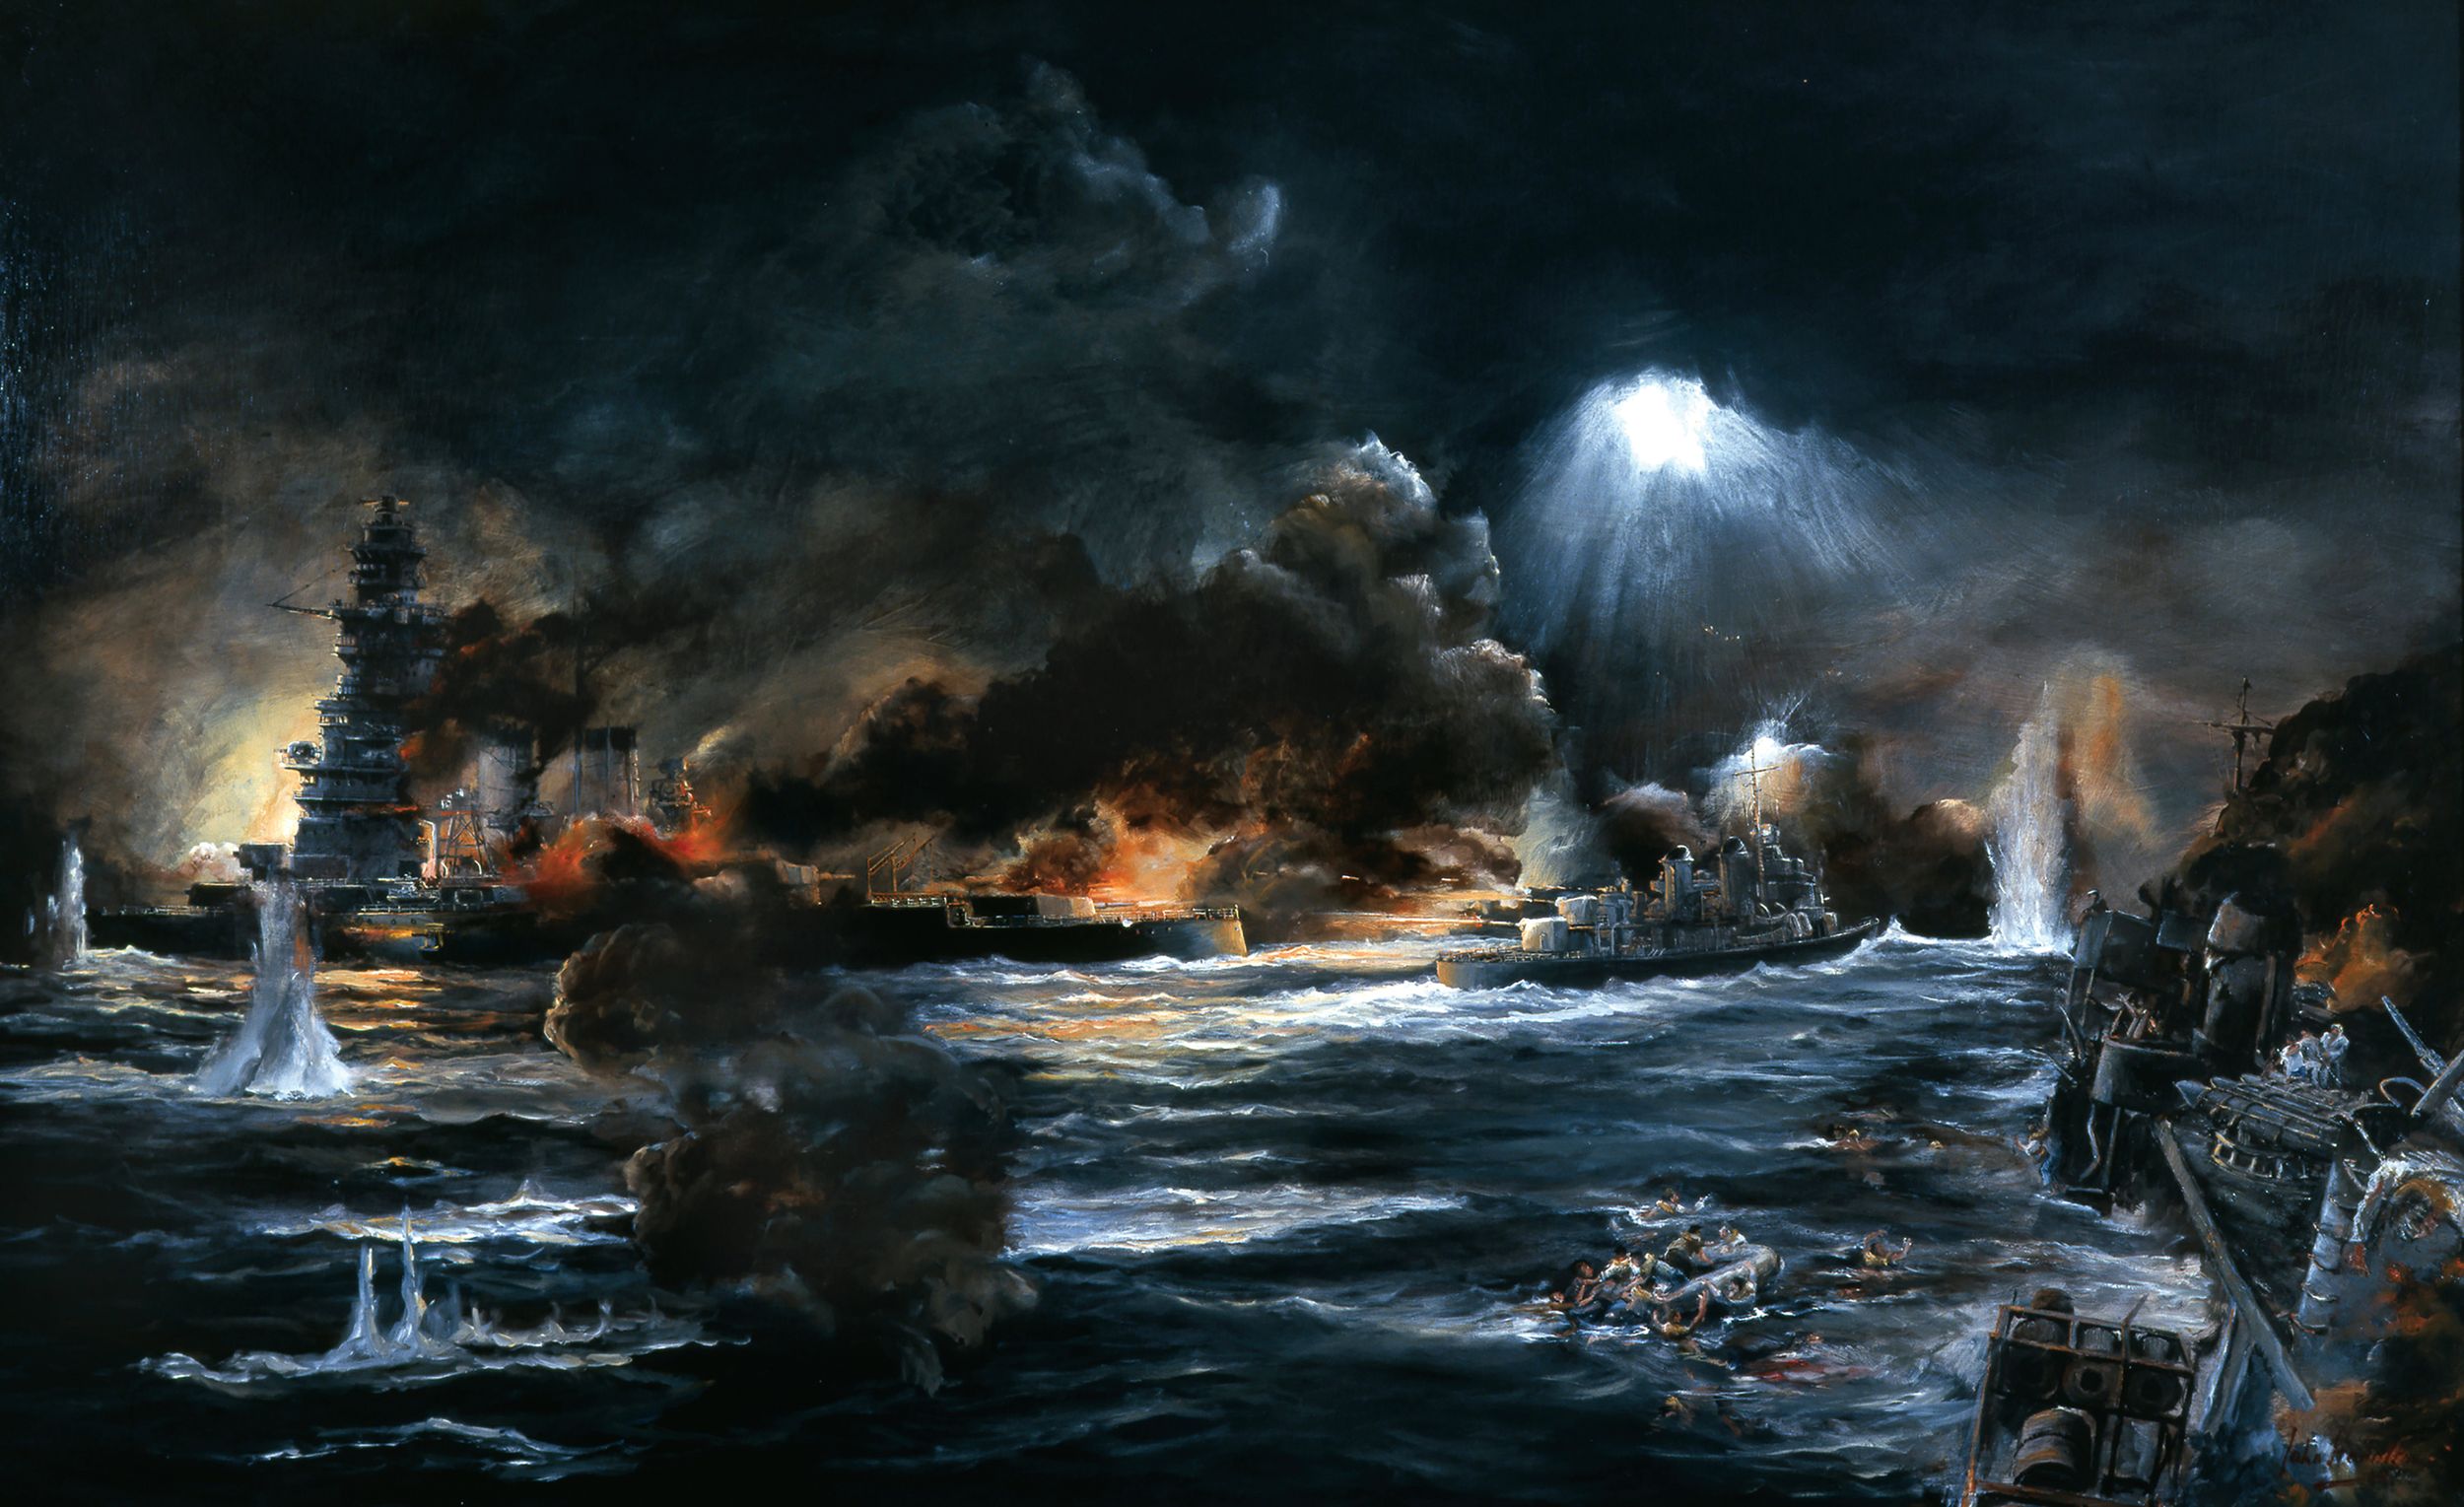 During Guadalcanal in November 1942, the bridge of the USS San Francisco was hit by a shell from a Japanese battleship, killing Captain Young, Admiral Daniel Callaghan, and several other officers.